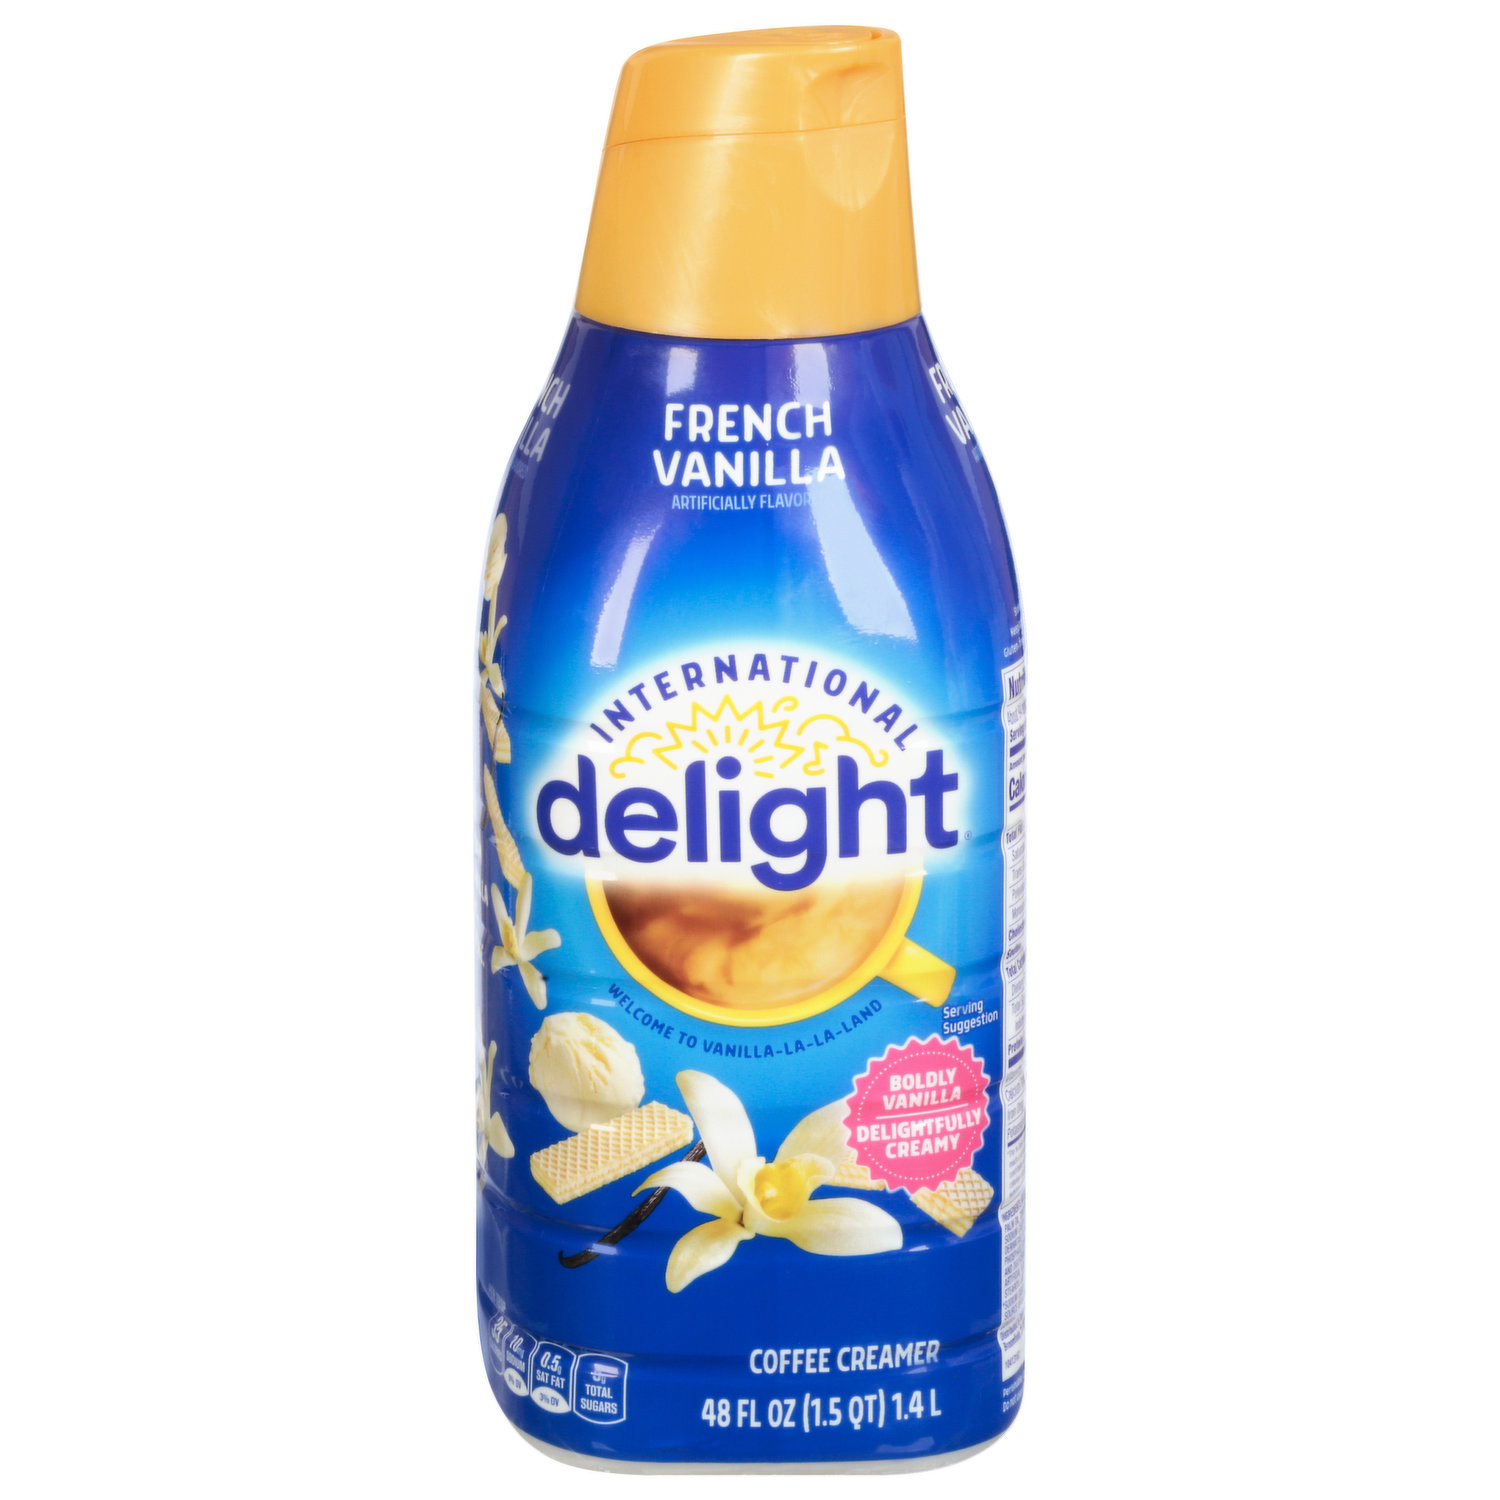 INTERNATIONAL DELIGHT® TURNED STRESS INTO JOY FOR THOUSANDS OF